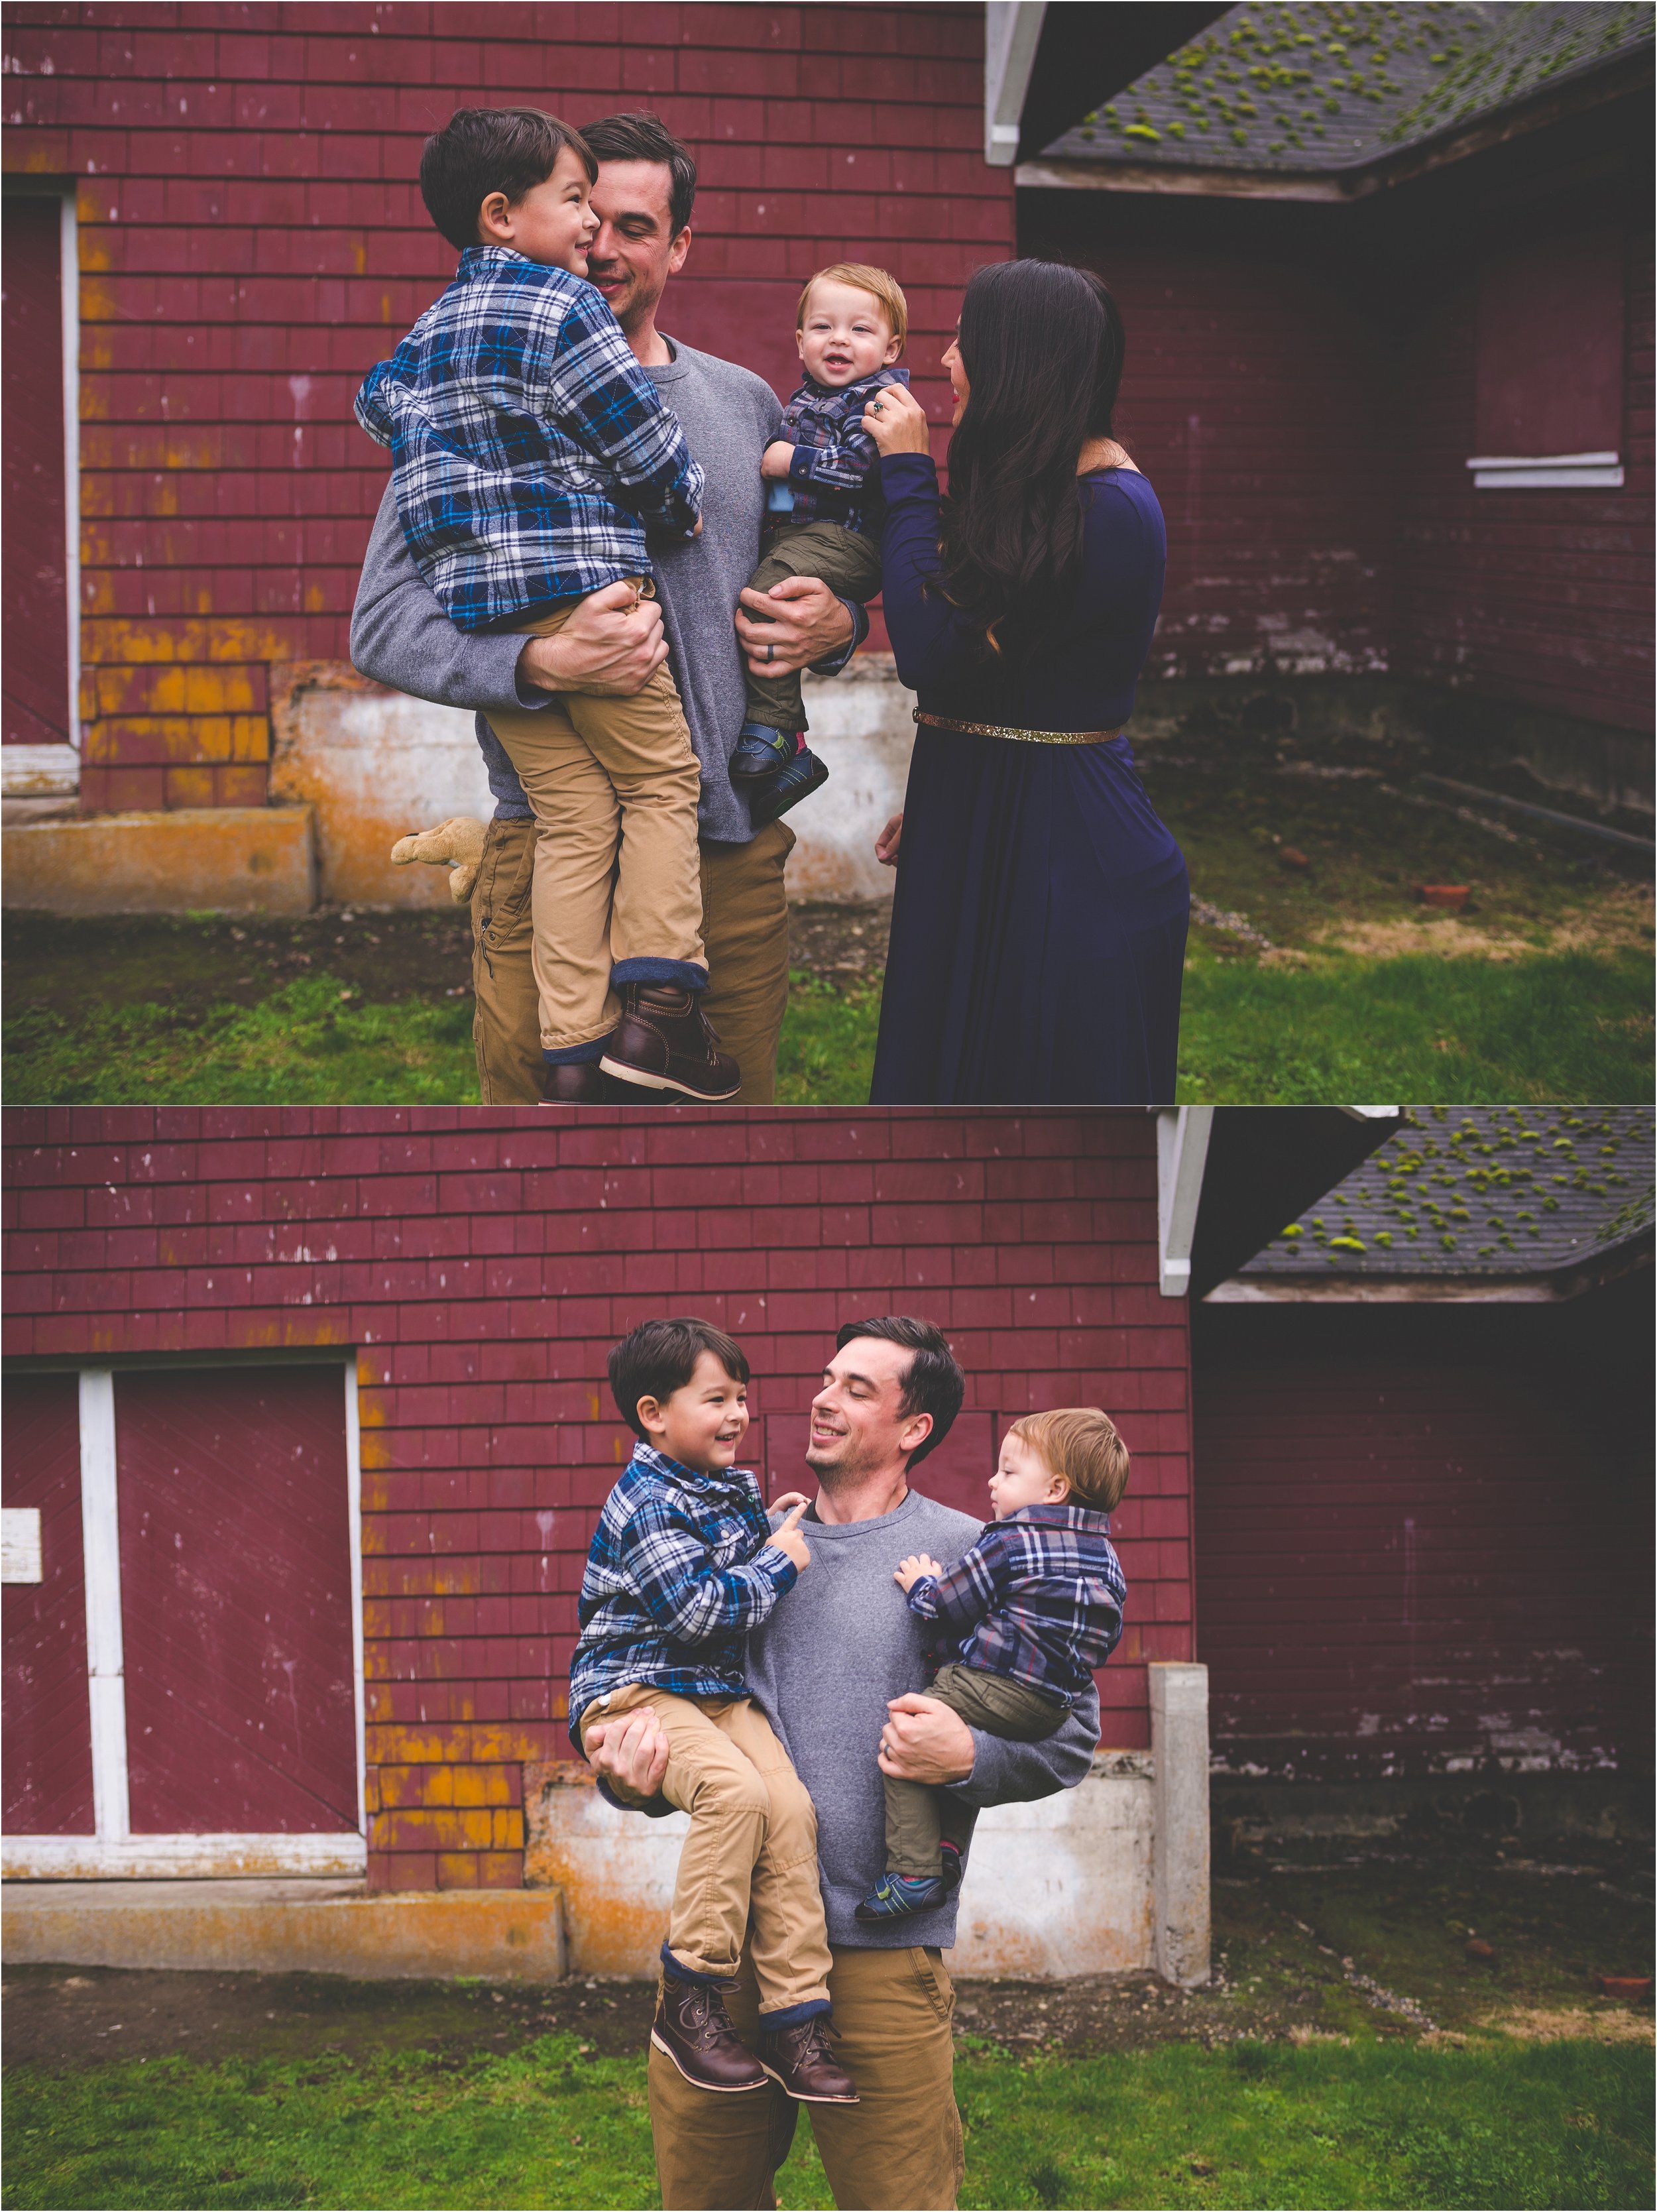 fort-steilacoom-park-family-session-jannicka-mayte-pacific-northwest-lifestyle-photographer_0006.jpg